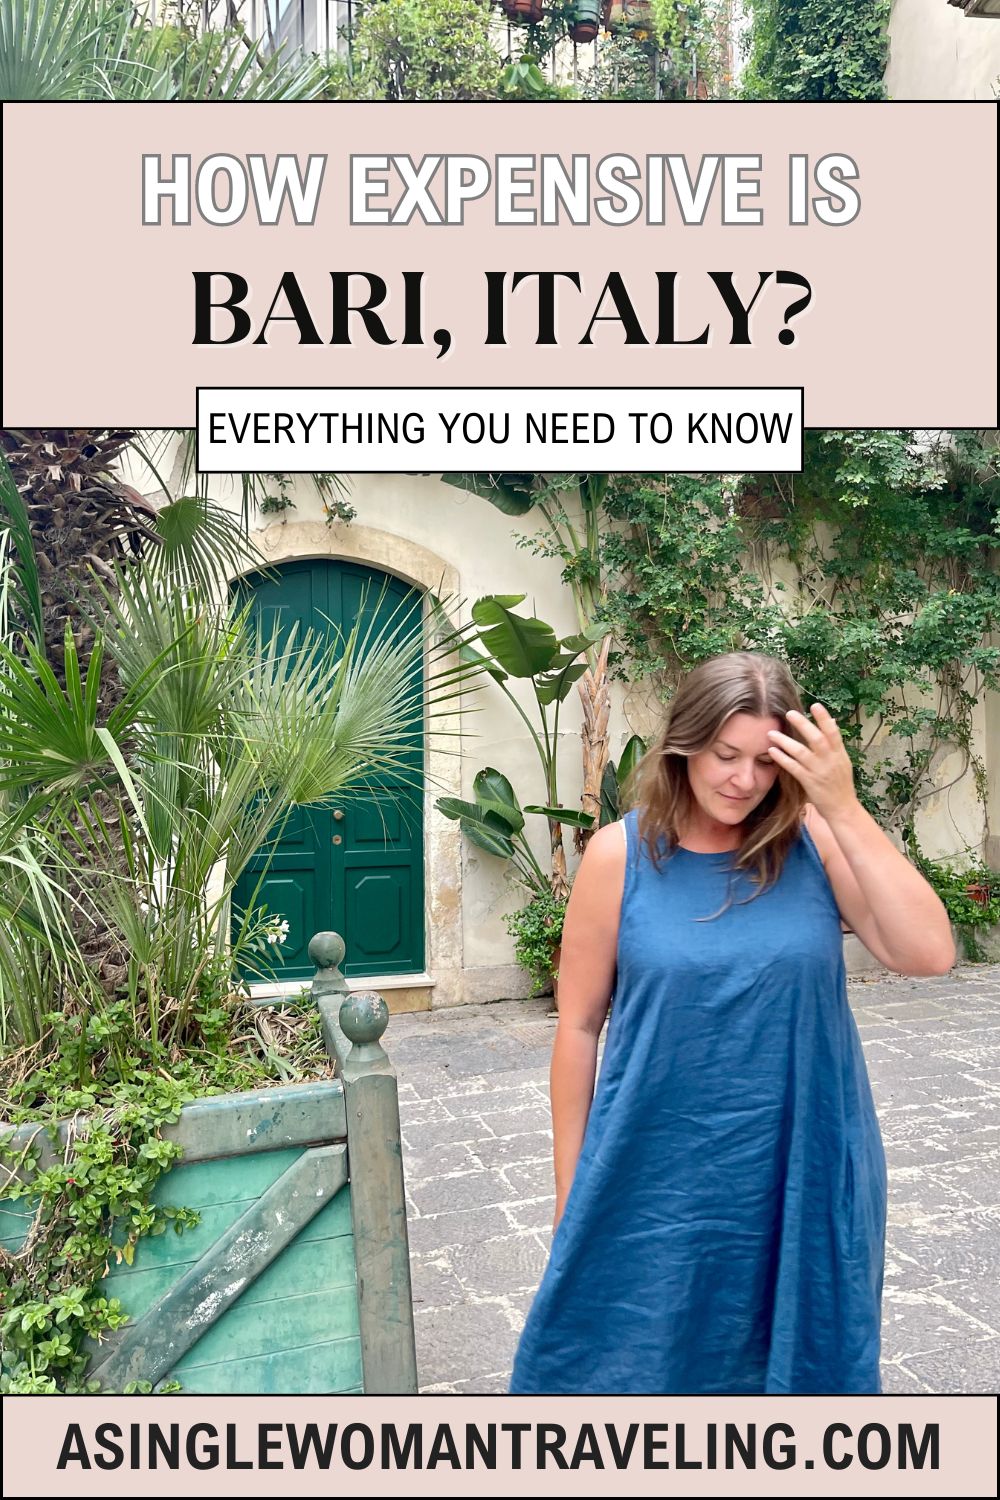 A promotional graphic titled 'How Expensive is Bari, Italy? Everything You Need to Know' with a photo of a woman in a blue dress standing in front of a green door and lush vegetation in Bari. The bottom of the graphic includes the website URL 'asinglewomantraveling.com'.